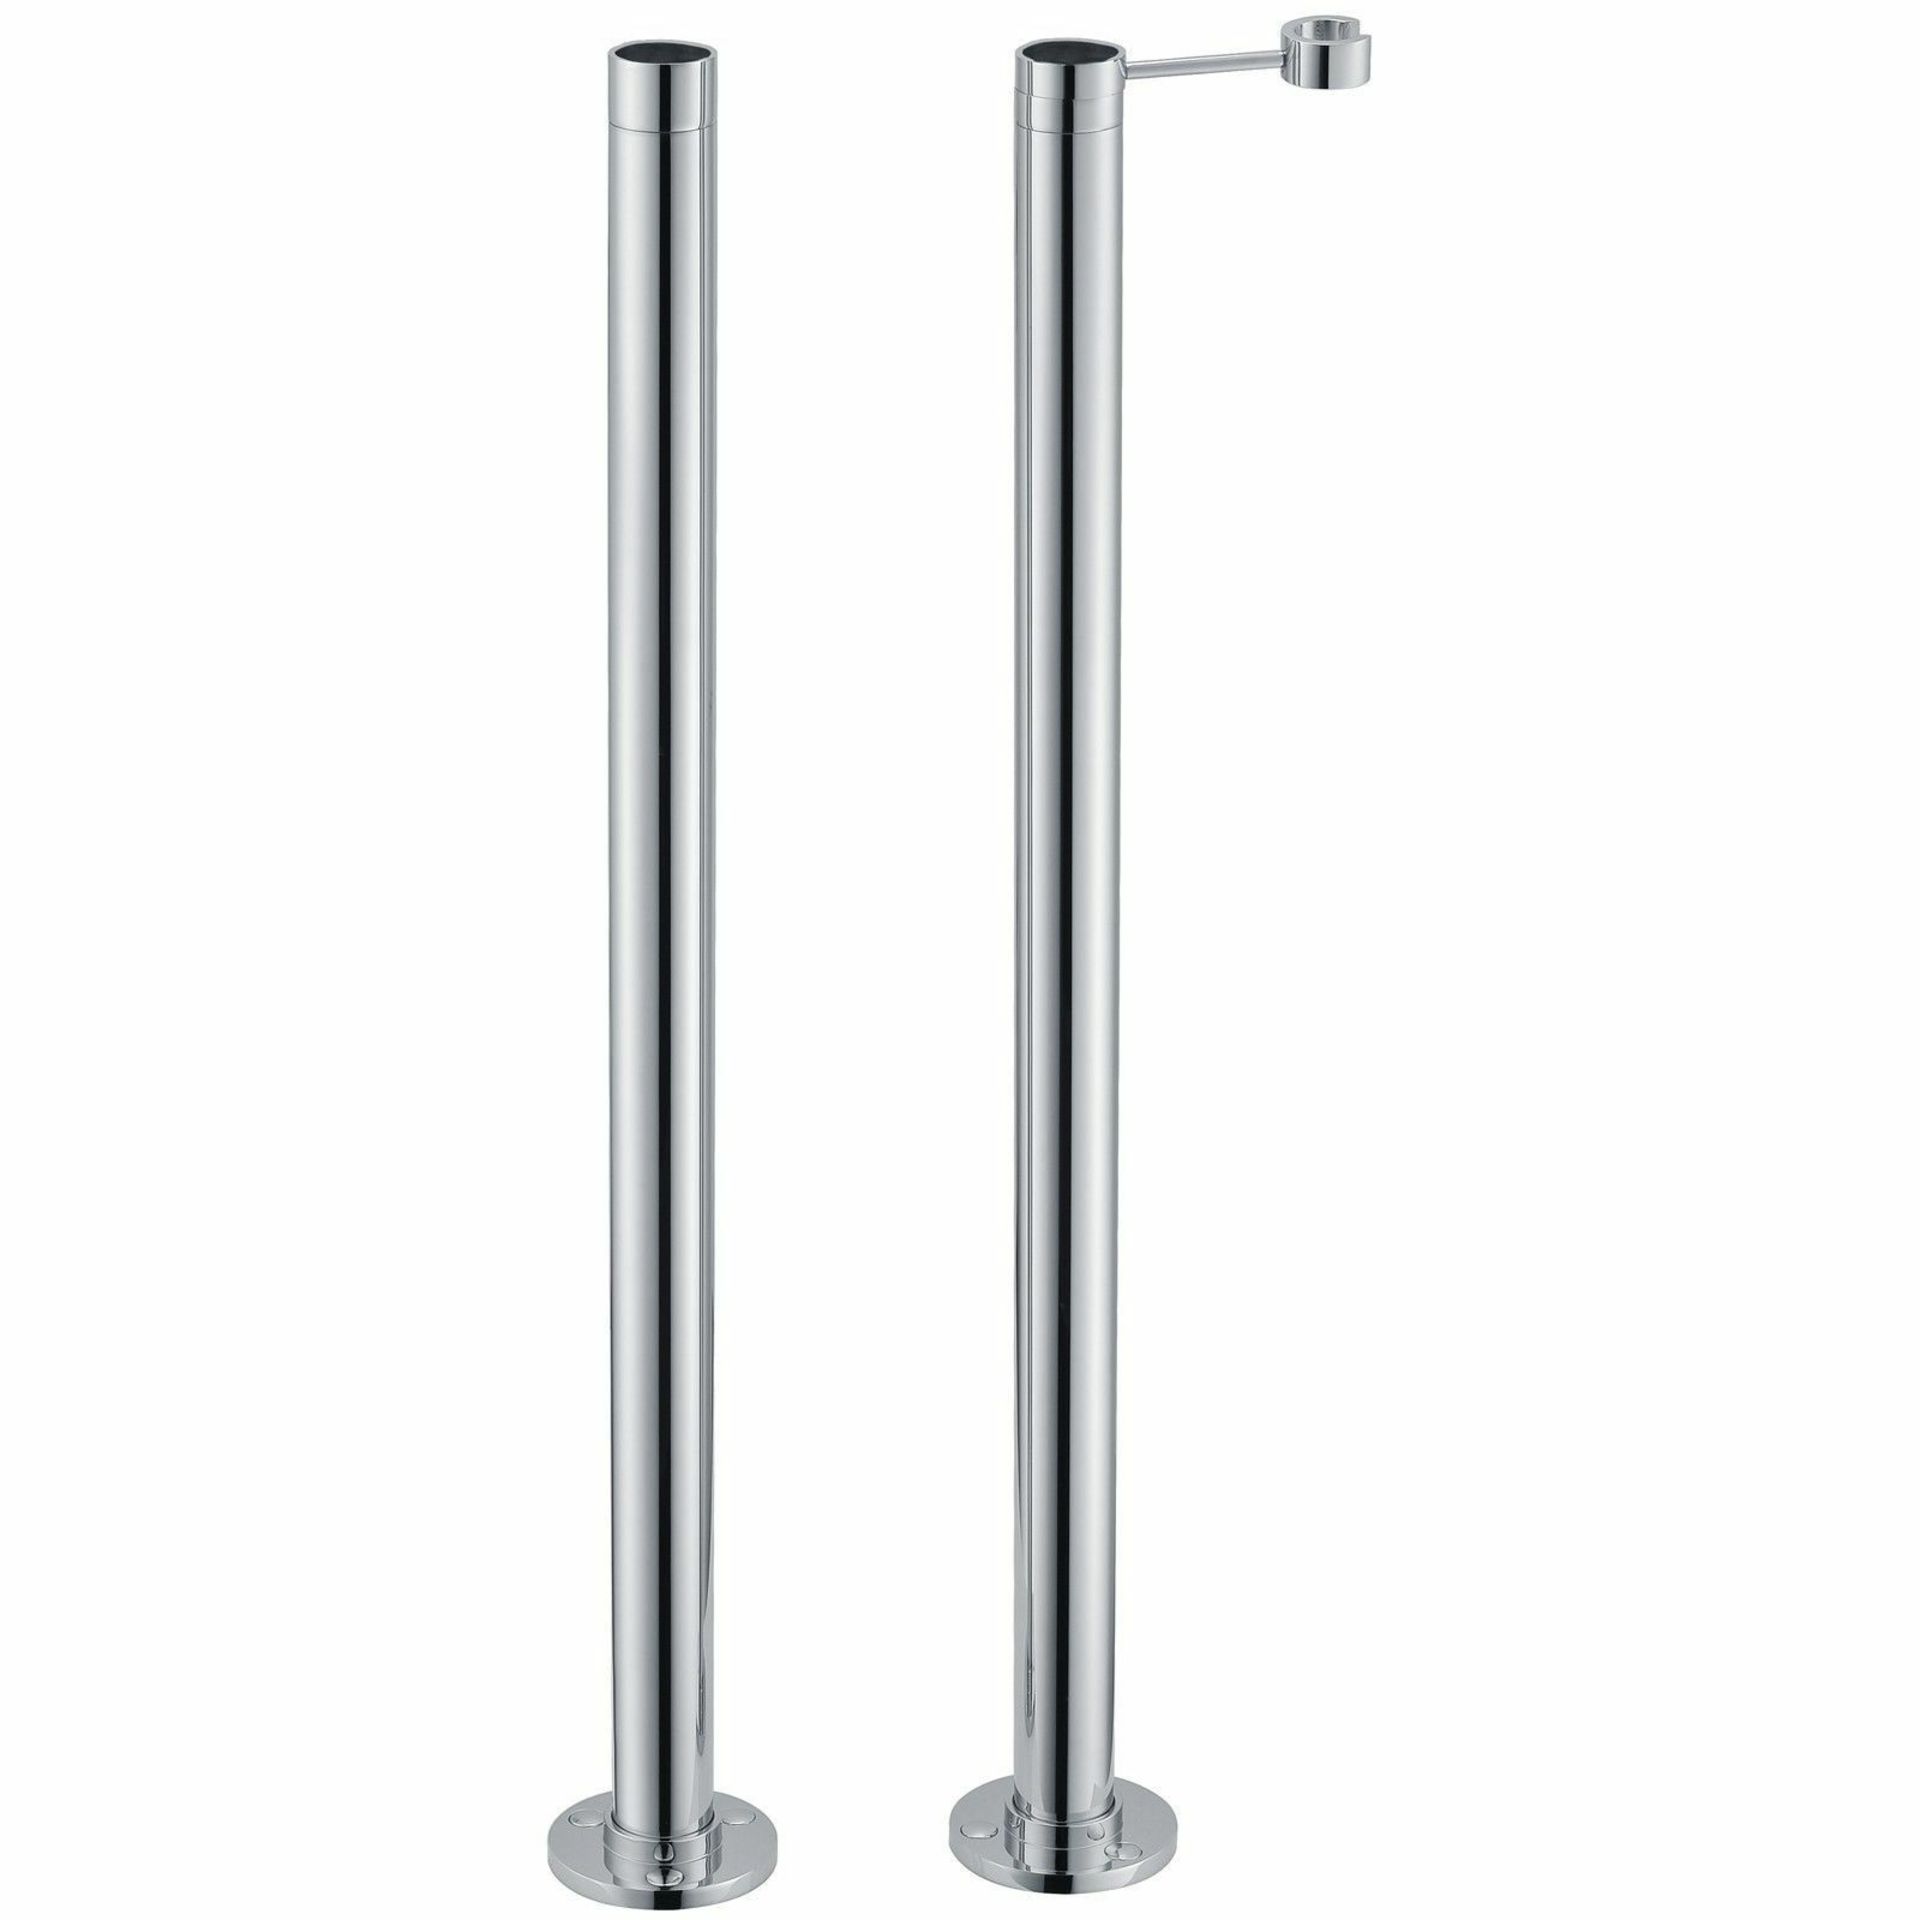 New (Y165) Rigid Standpipes Bath Tap Legs Pair A Pair Of Quality Freestanding Bath Standpipes, ...